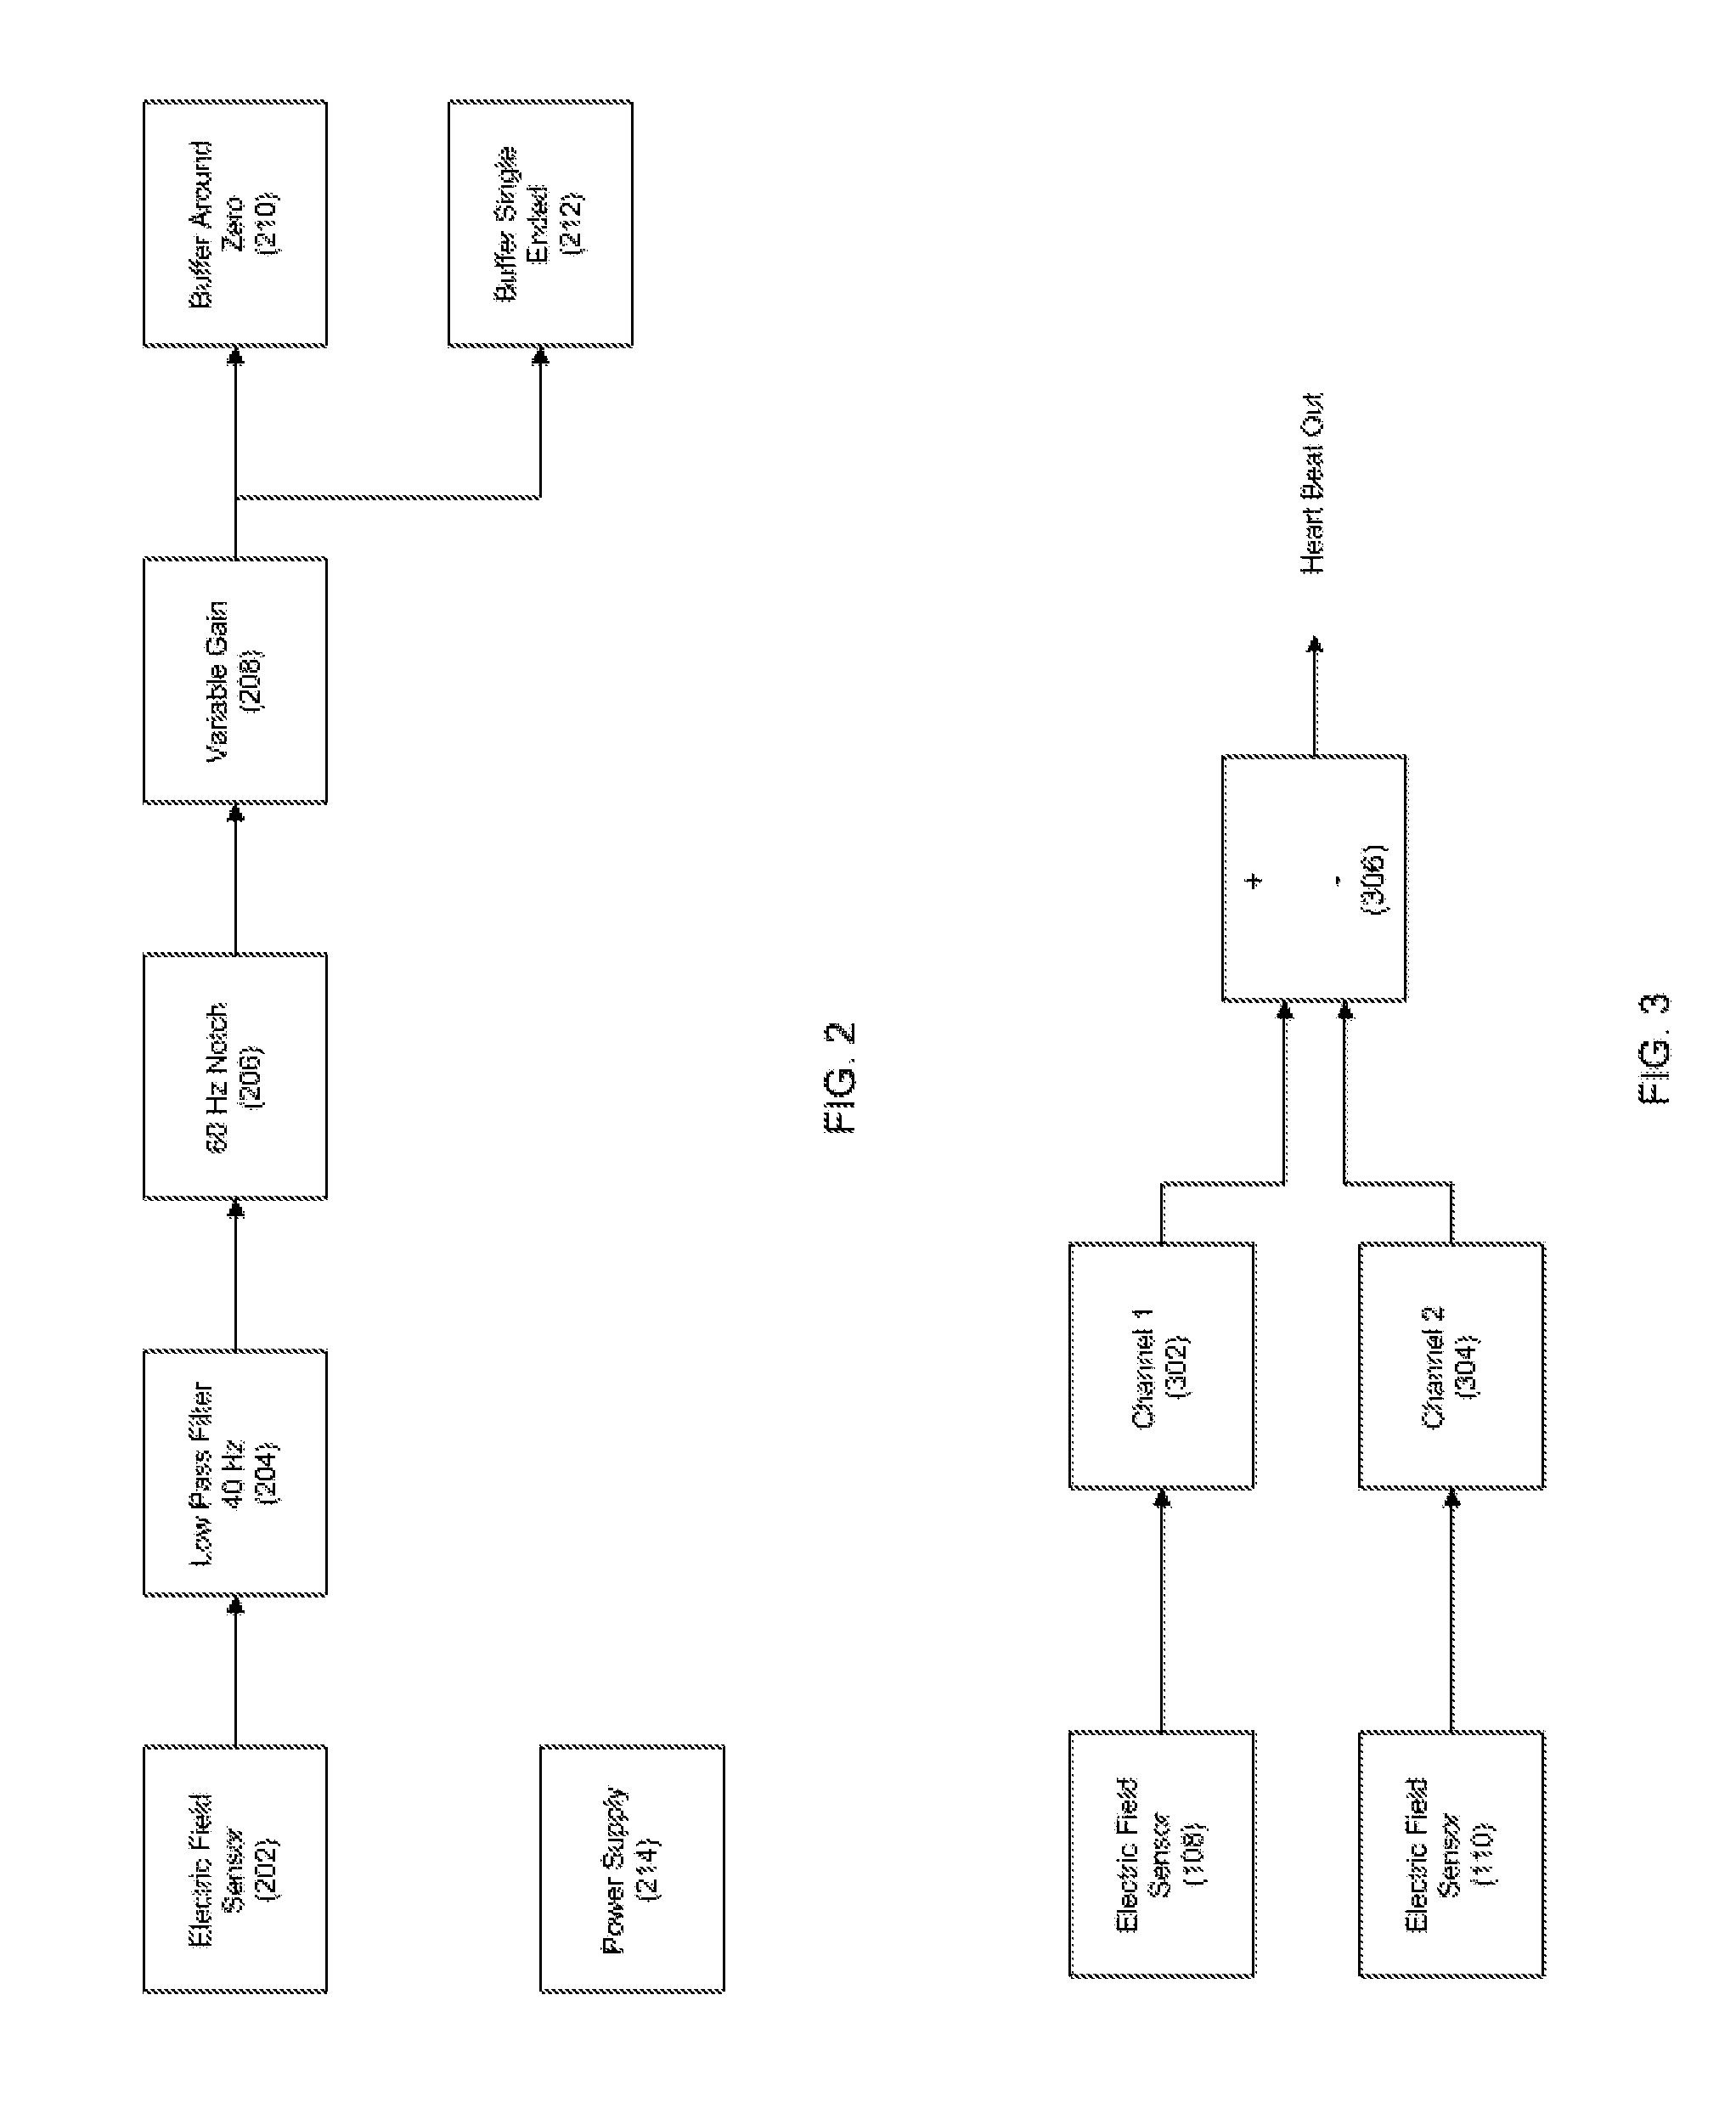 System, Method, and Apparatus for Detecting Coupling to a Patient Using One or More Electric-Field Sensors